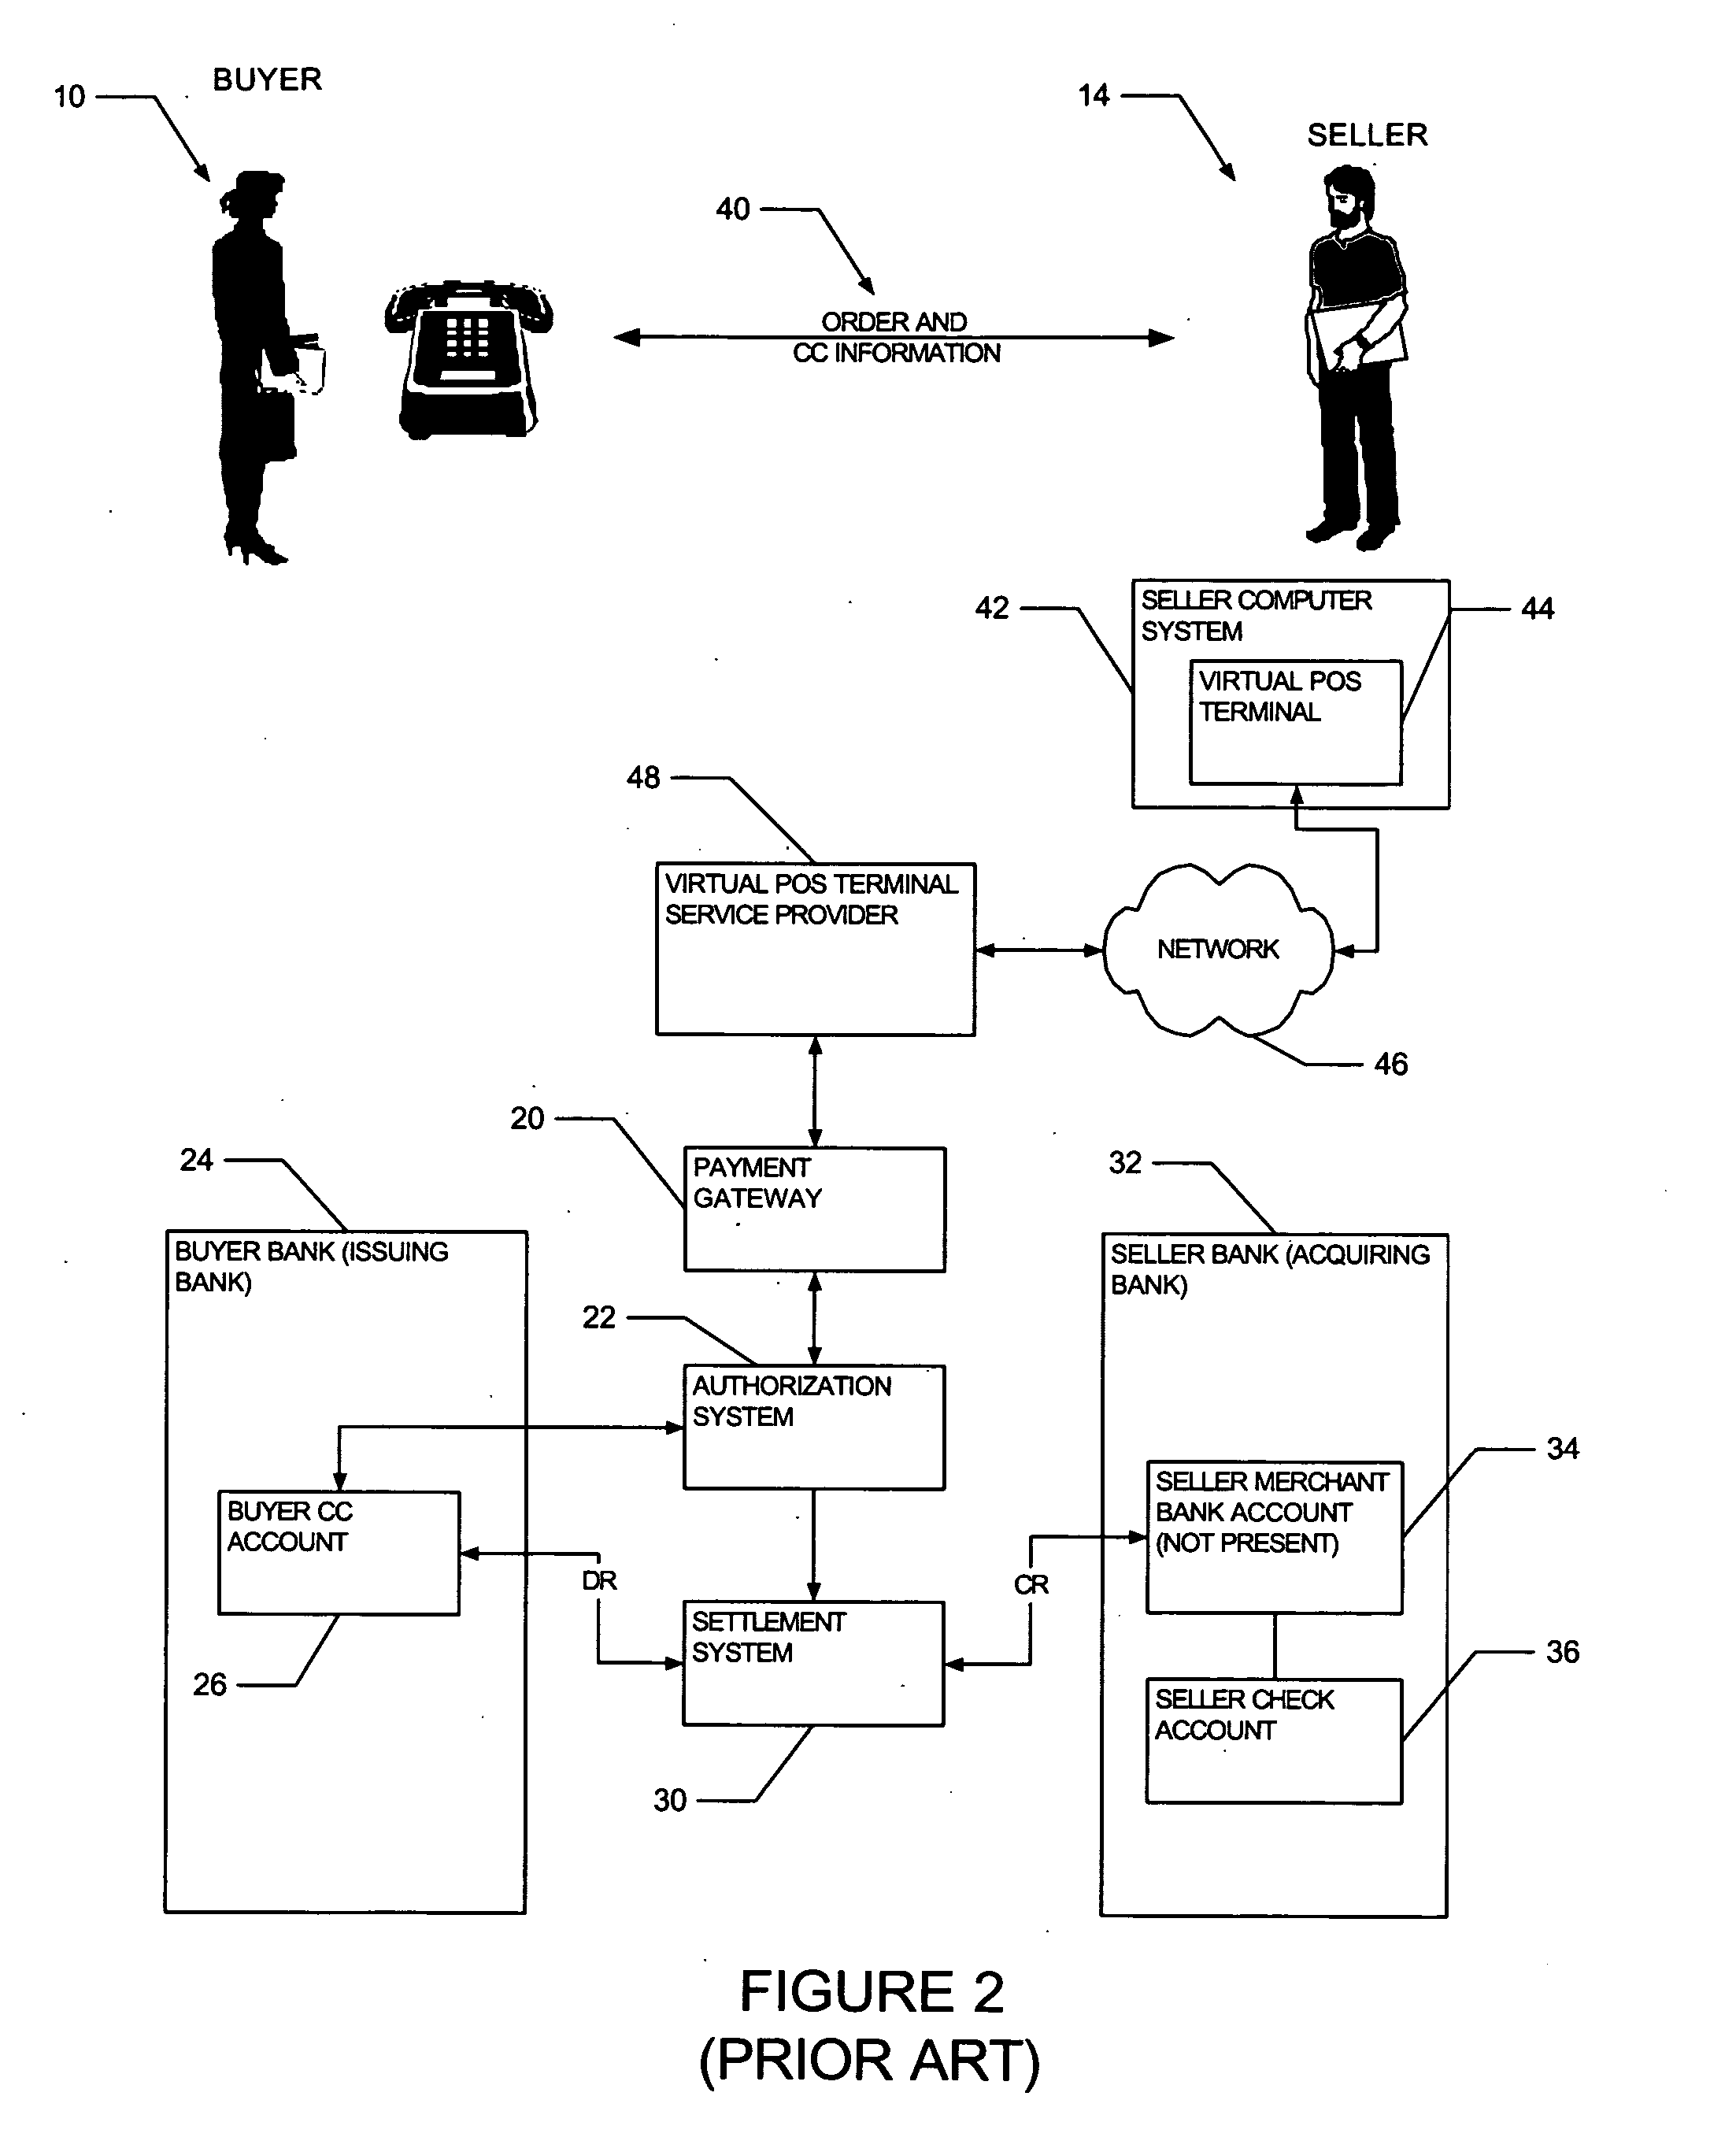 Method and system to process credit card payment transactions initiated by a merchant